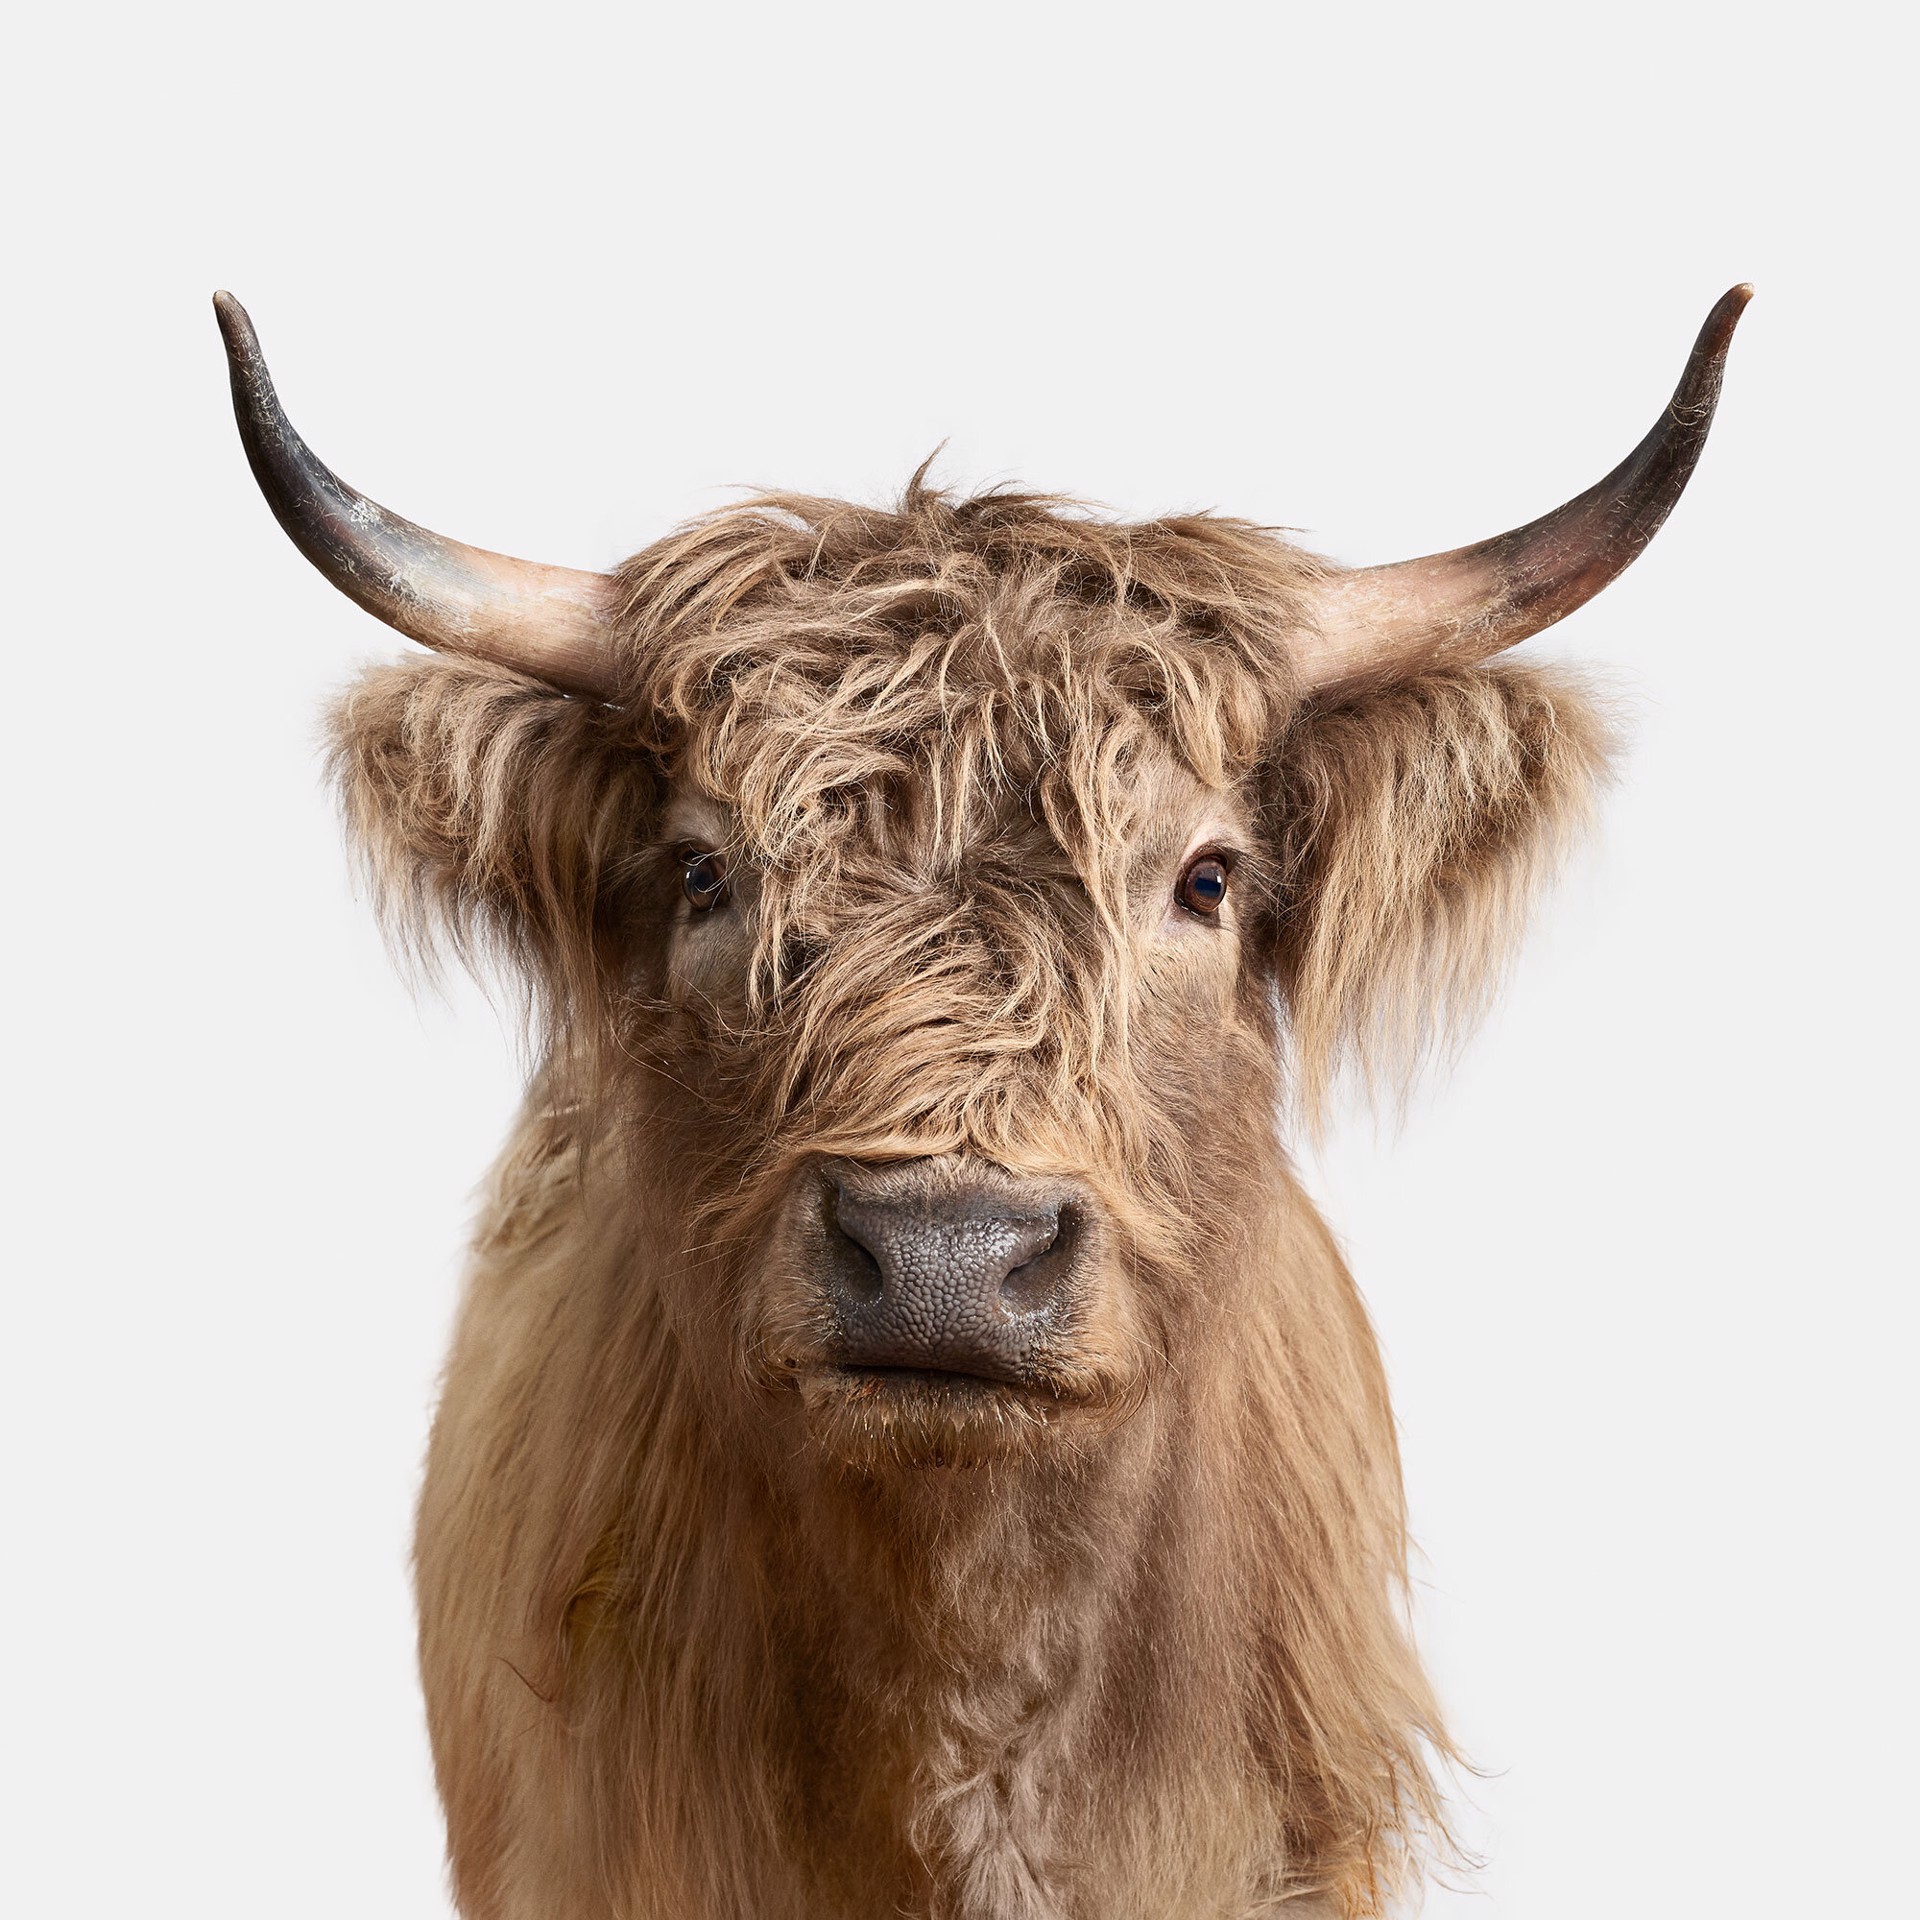 Highland Cow No. 2 by Randal Ford